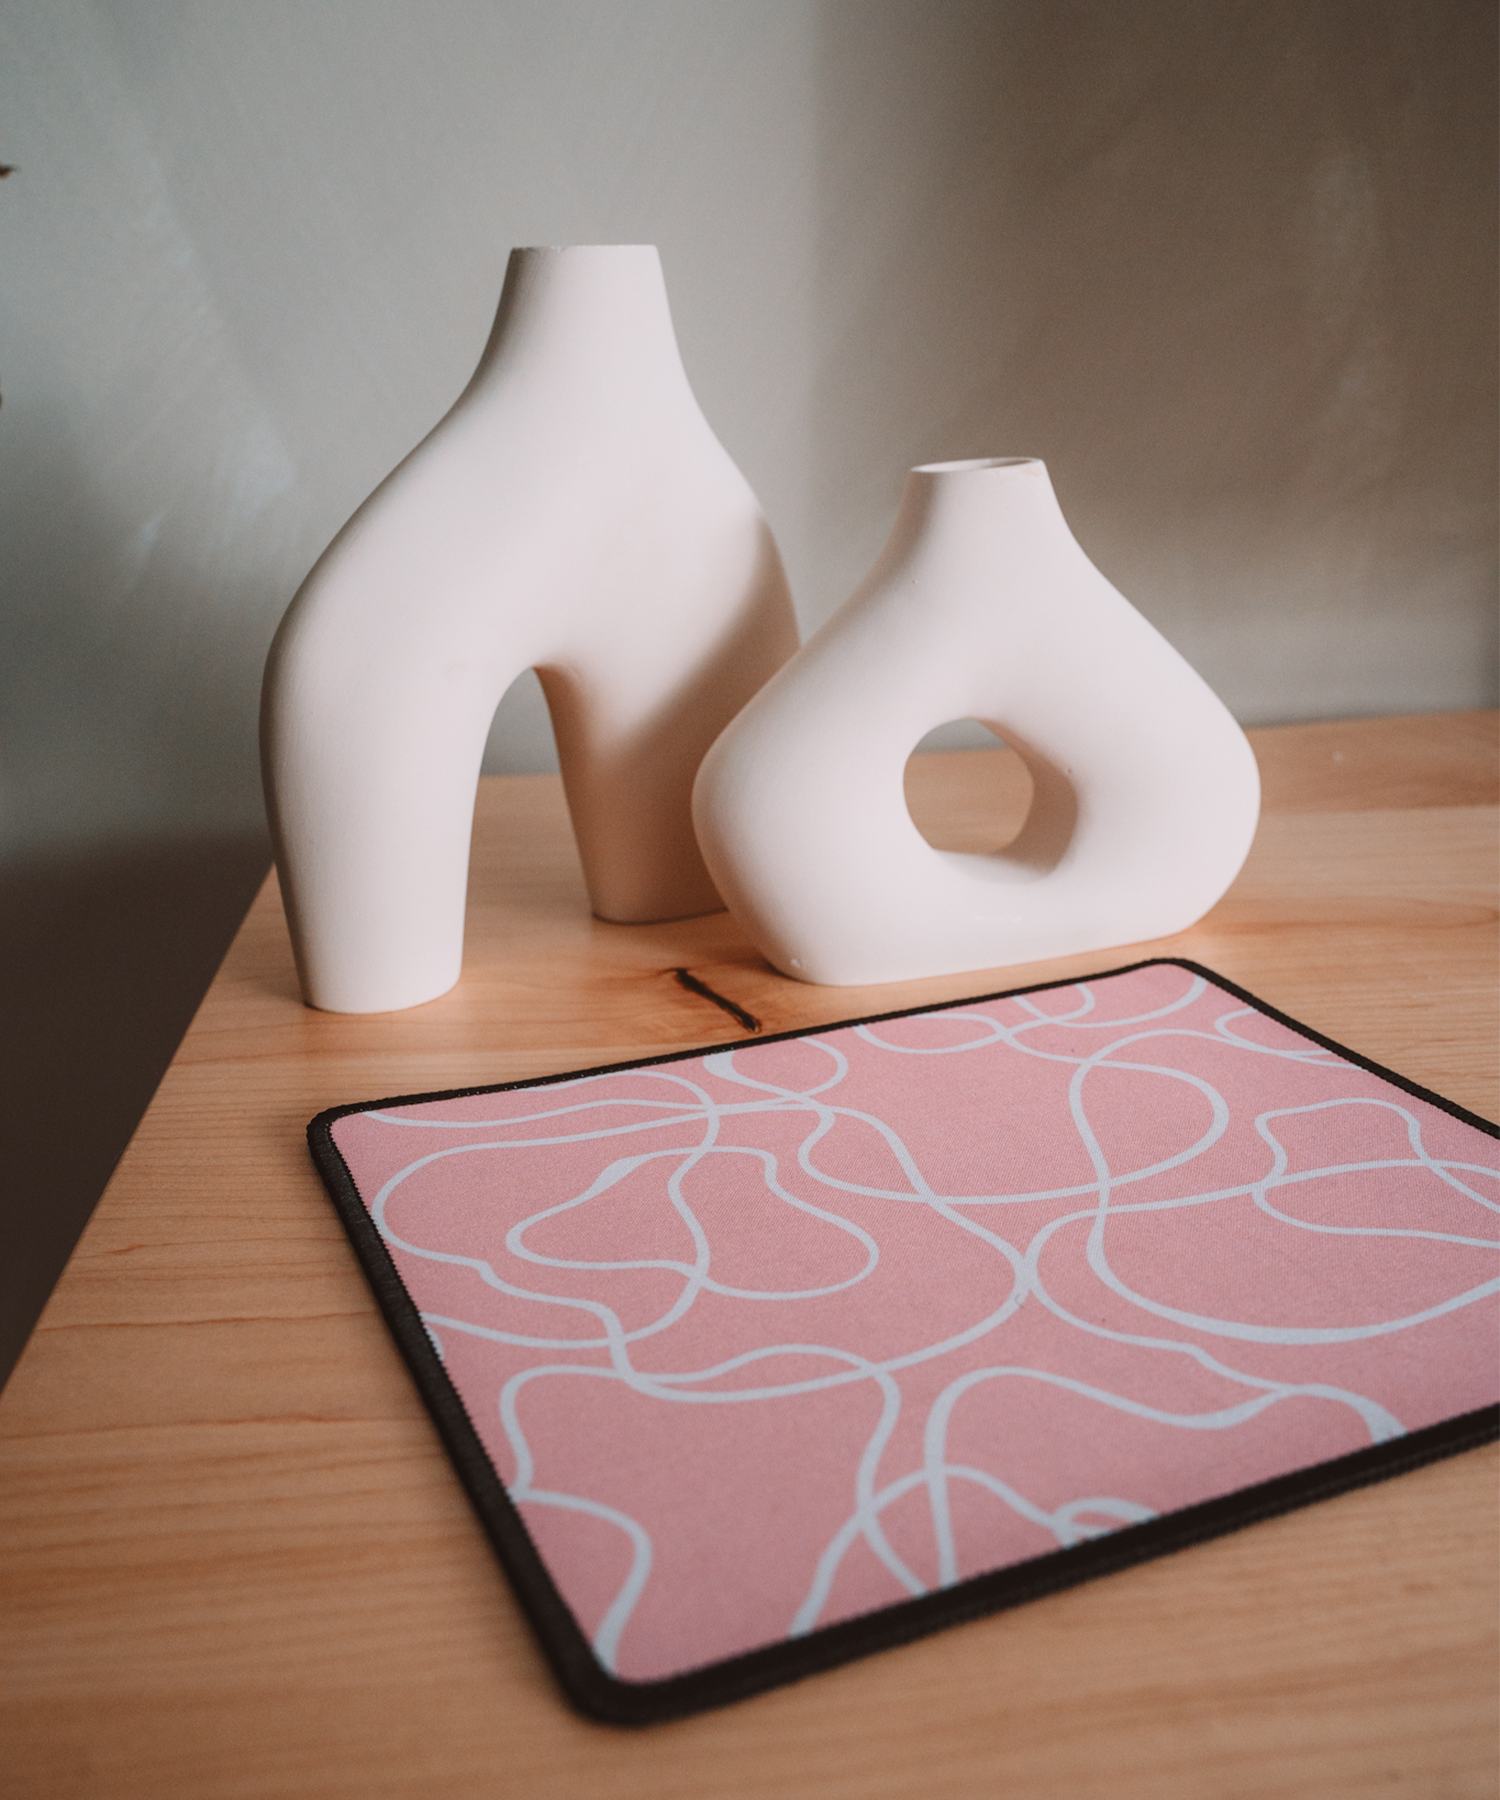 The Terrain mousepad laying on a desk with two asymmetrical vases in the background